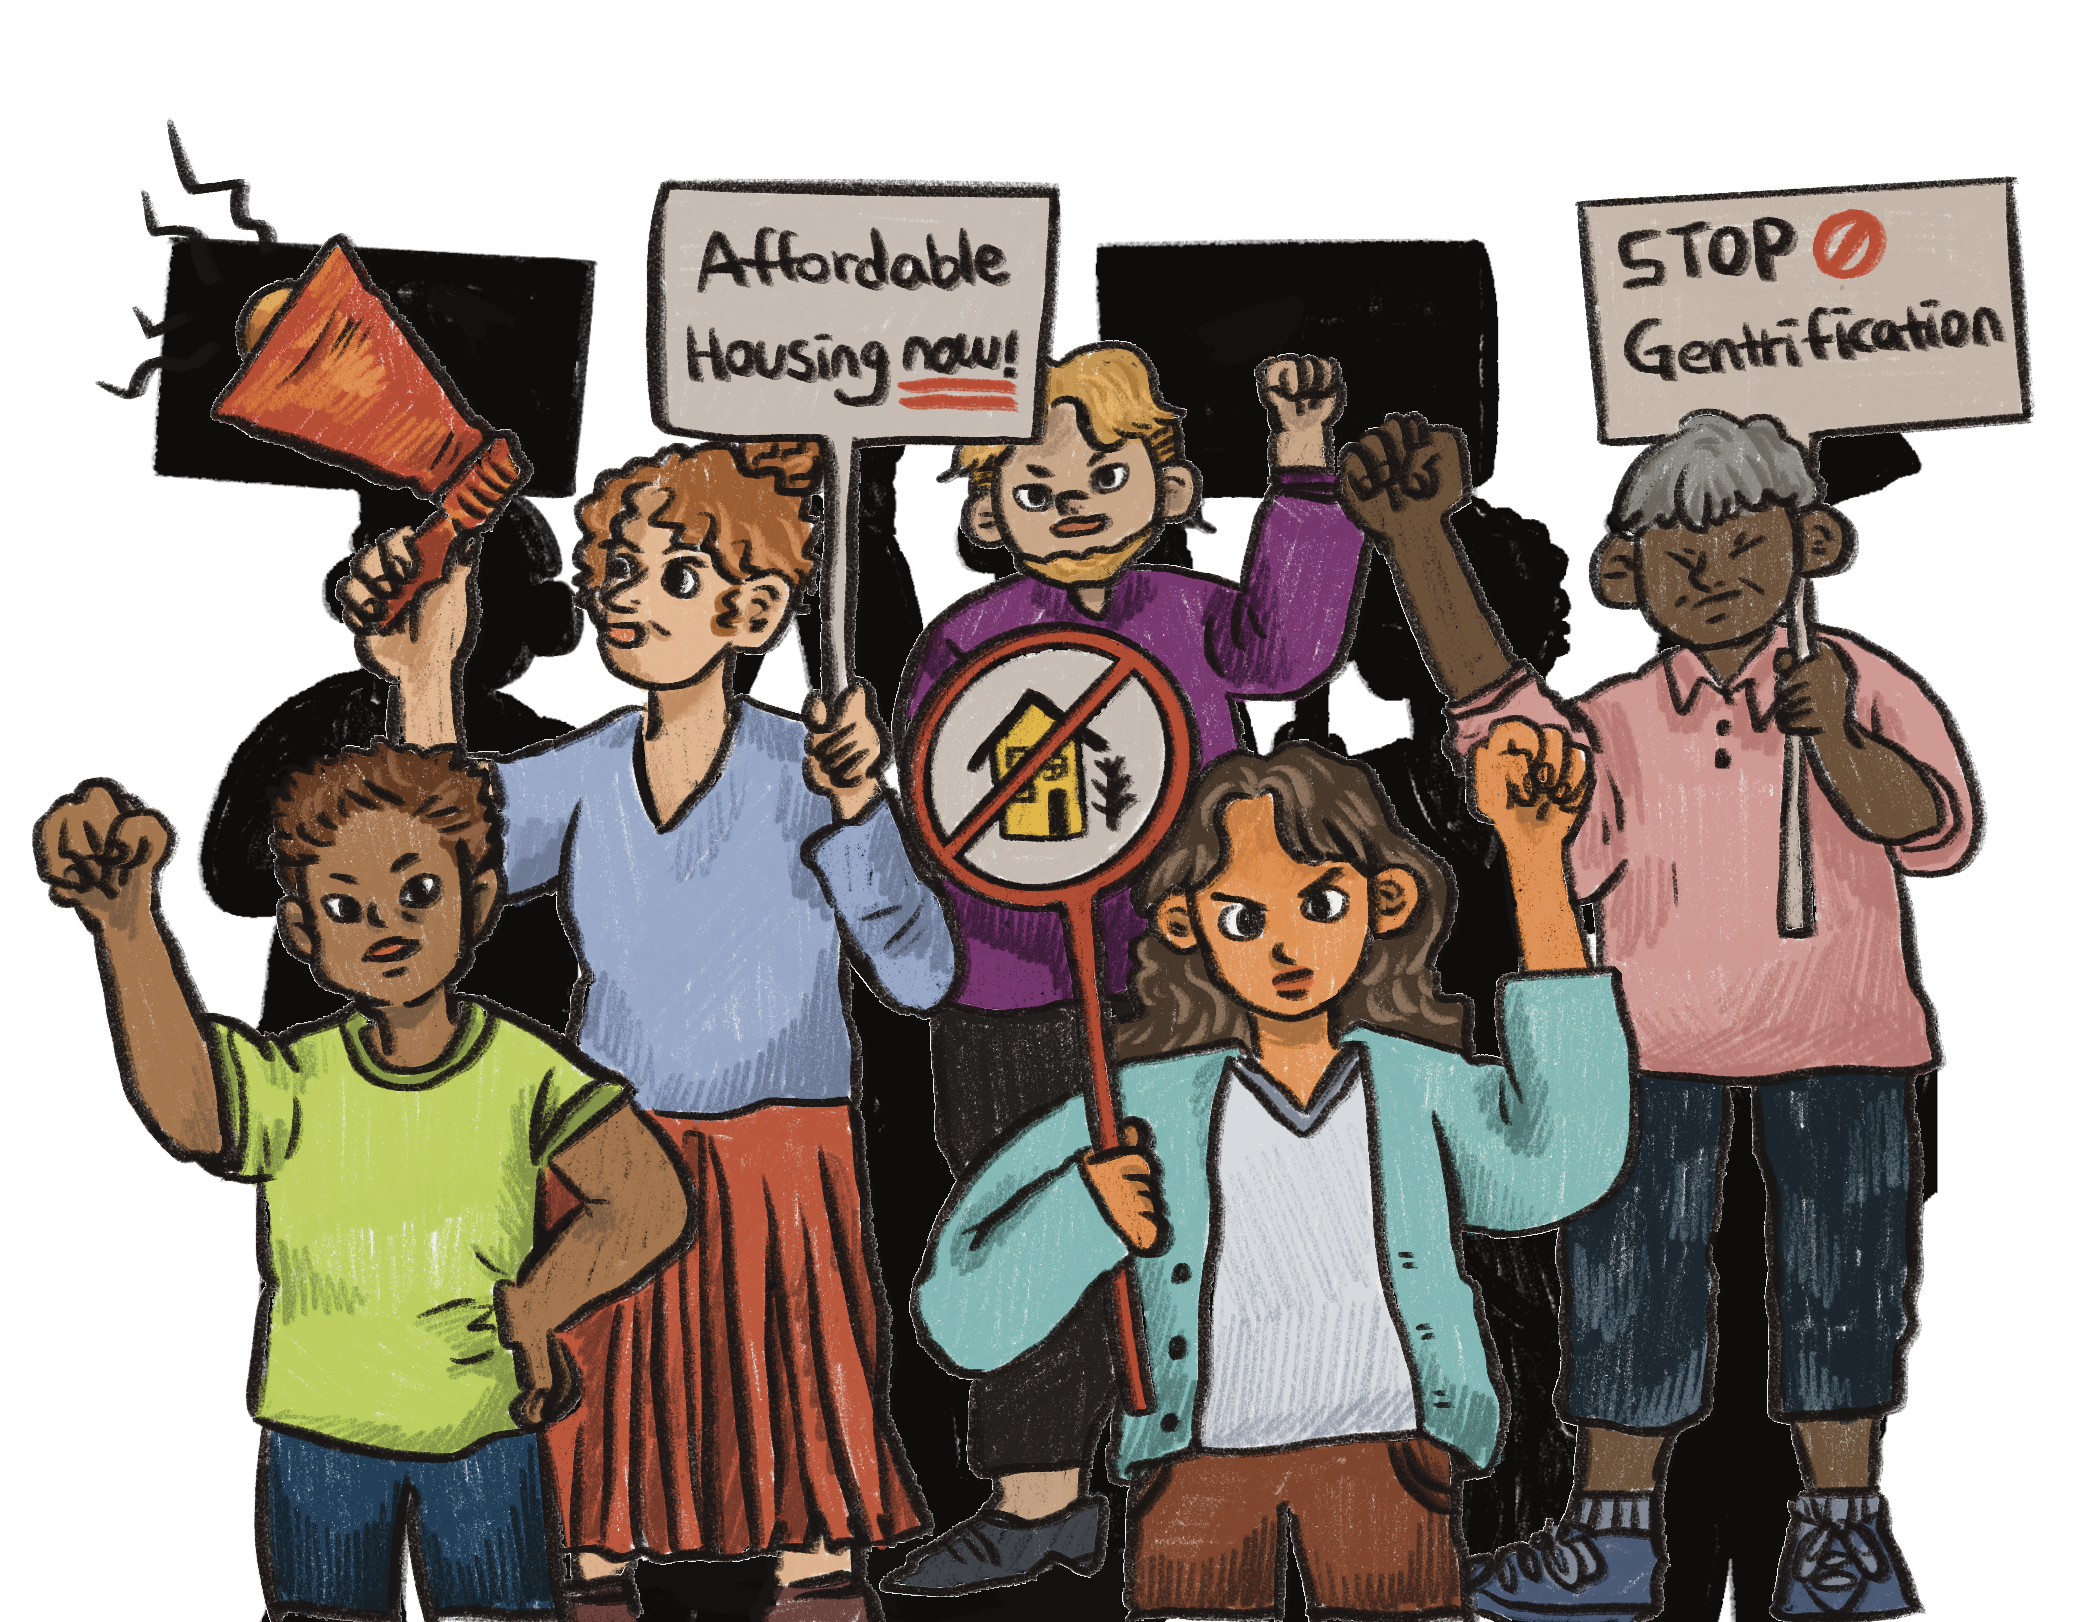 An illustration of a group of people holding signs in protest of gentrification